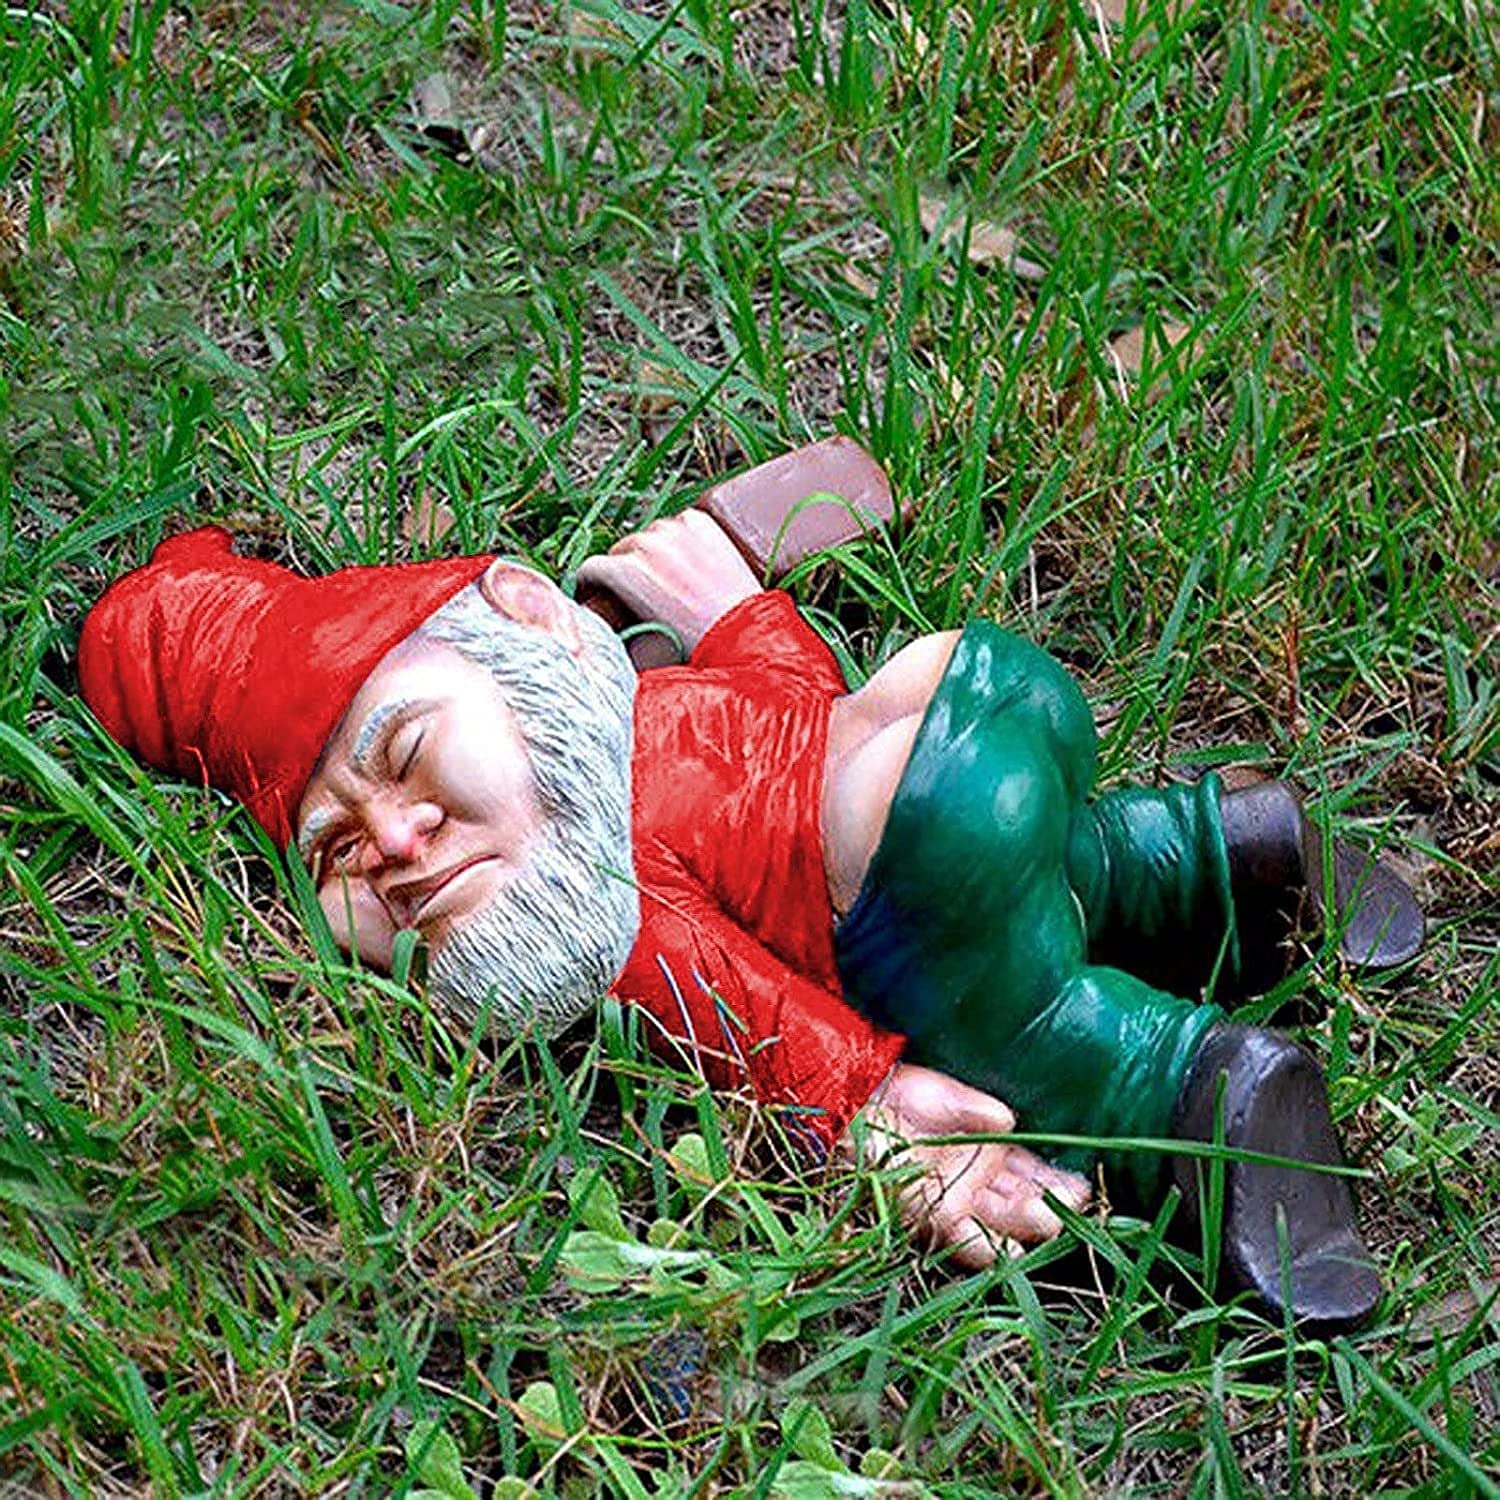 IcyAits Funny Drunk Dwarf Garden Gnome Statues Decoration, Creative Statue Resin Sculpture Novelty Gift for Outdoor Indoor Patio Yard Lawn Porch Ornament Decor